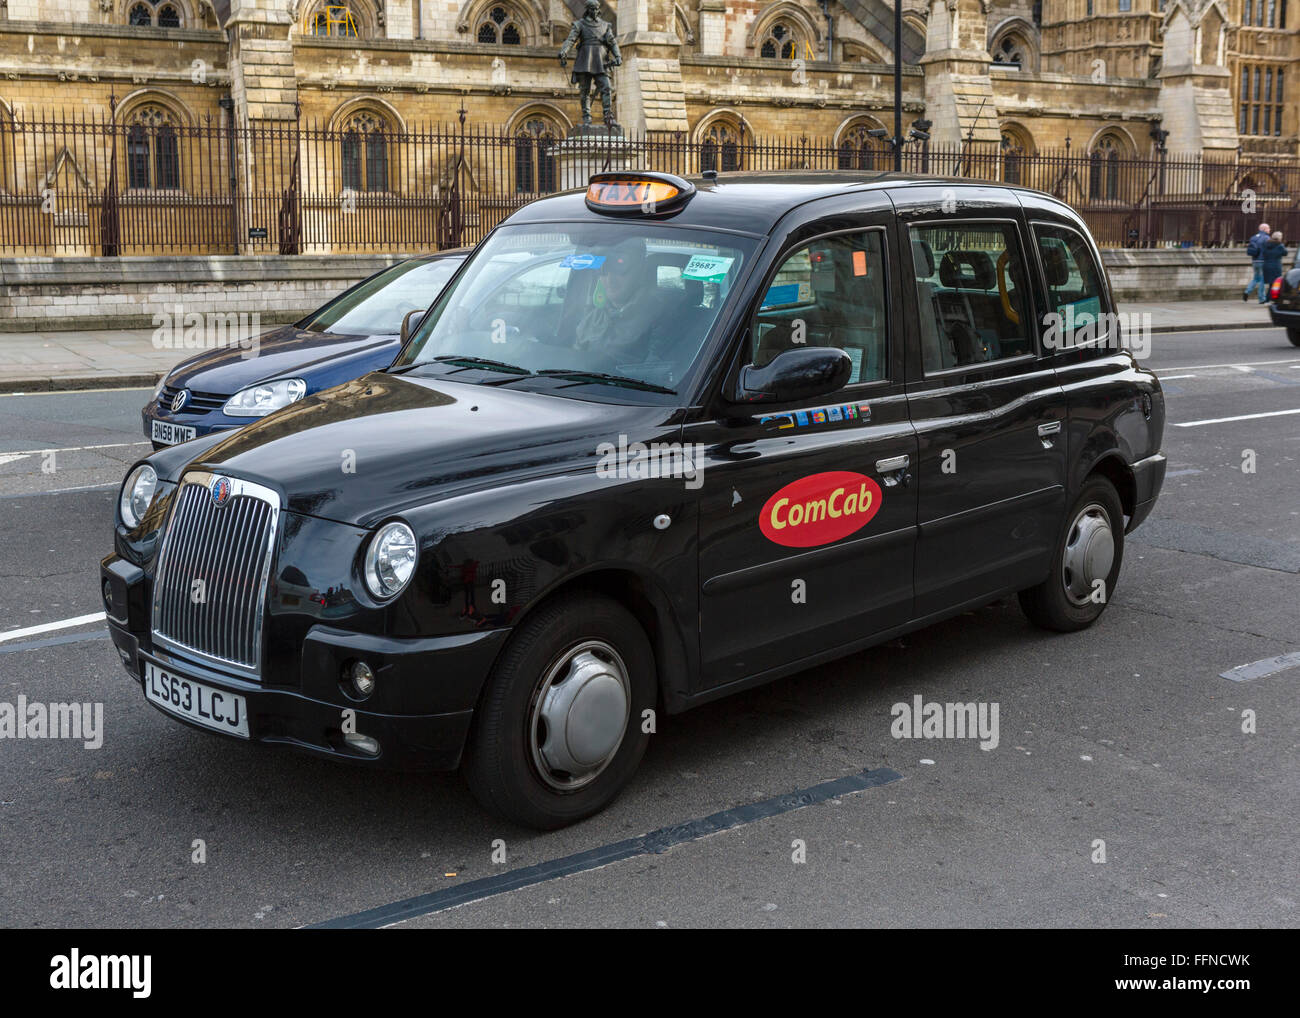 London taxi cab outside the Houses of Parliament (Palace of Westminster), Westminster, London, England, UK Stock Photo